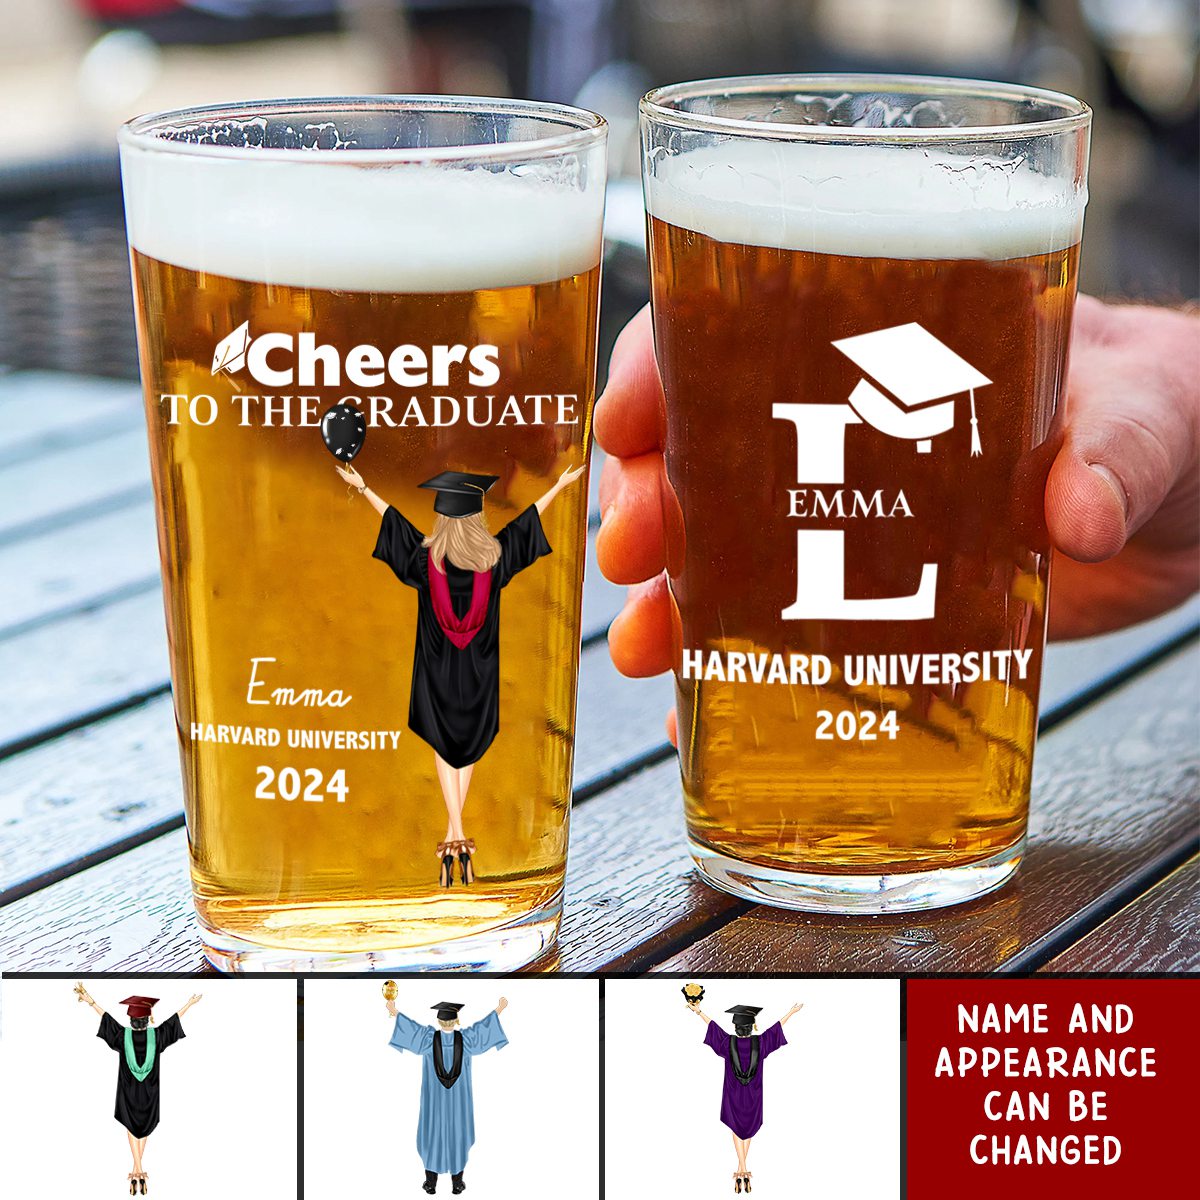 Pairs Well With Graduating - Personalized Beer Glass